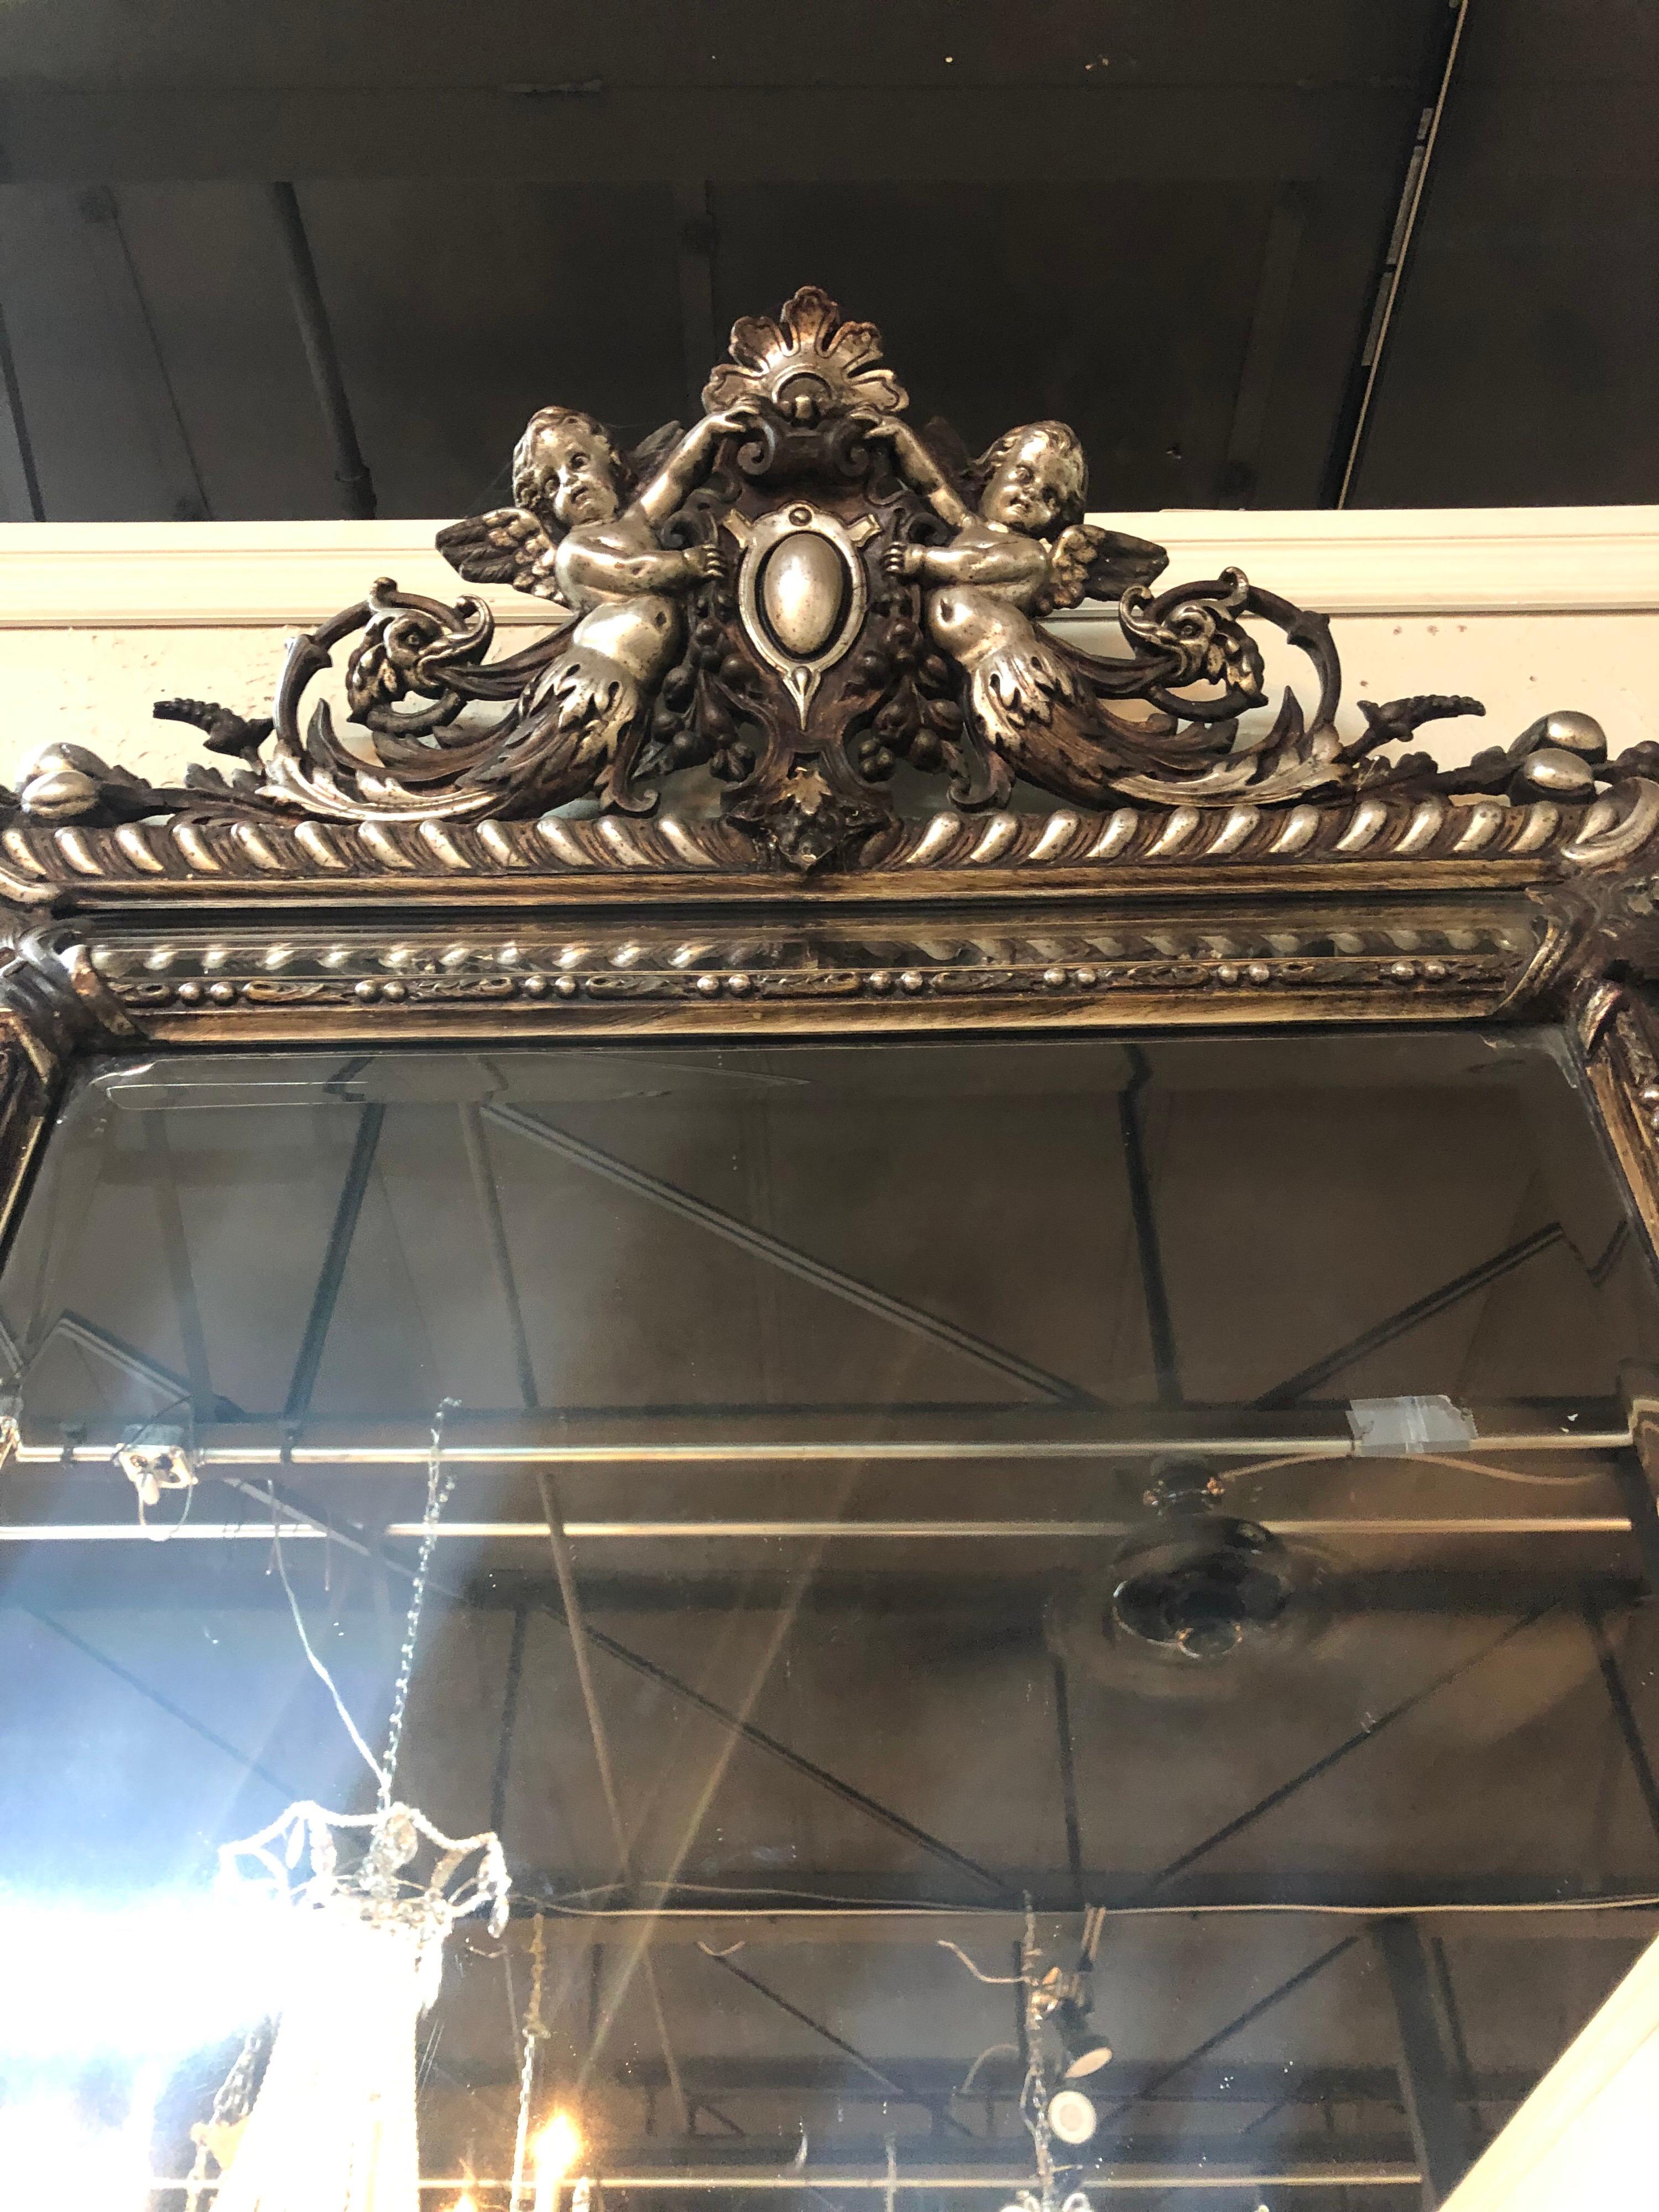 Beautiful 19th century French carved silver gilt cushion mirror with a pair of cherubs at the top. Very fine carving and gilt on this piece.